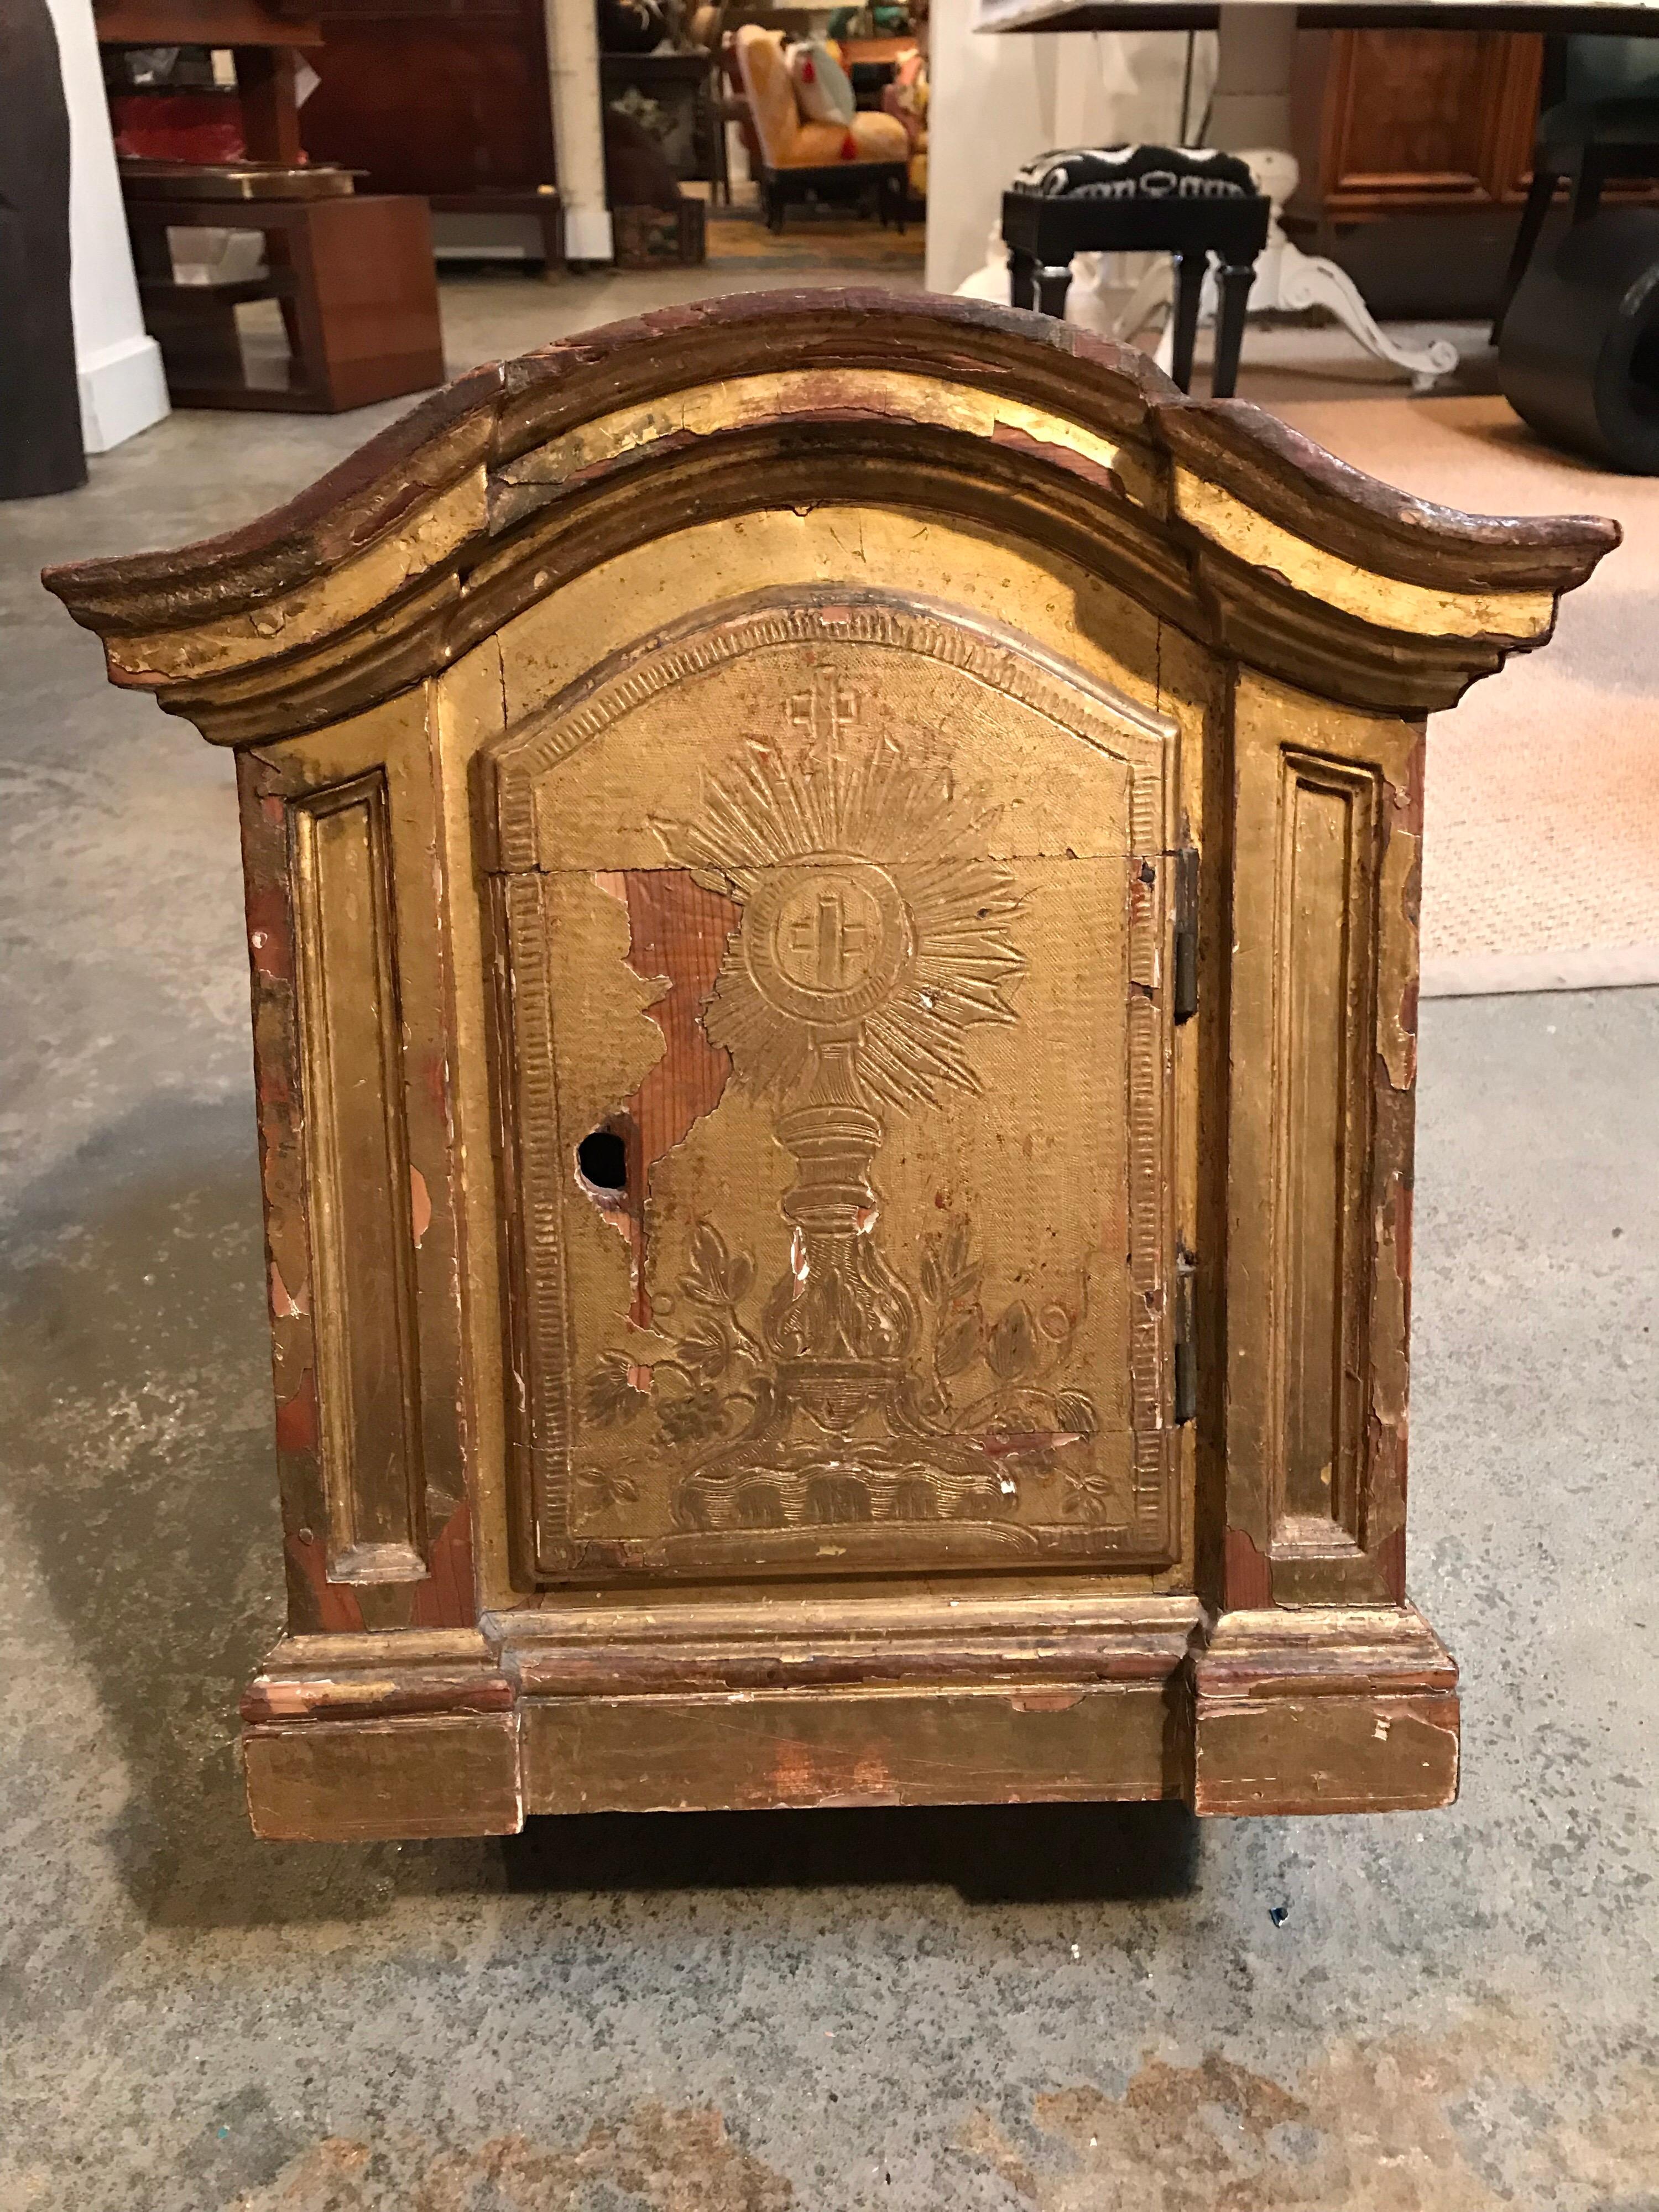 This 18th century Italian gilded reliquary box is made to contain a personal relic or shine. It has brackets for wall mounting. The front of the door has a hand carved image of such a shrine with a cross in the center.